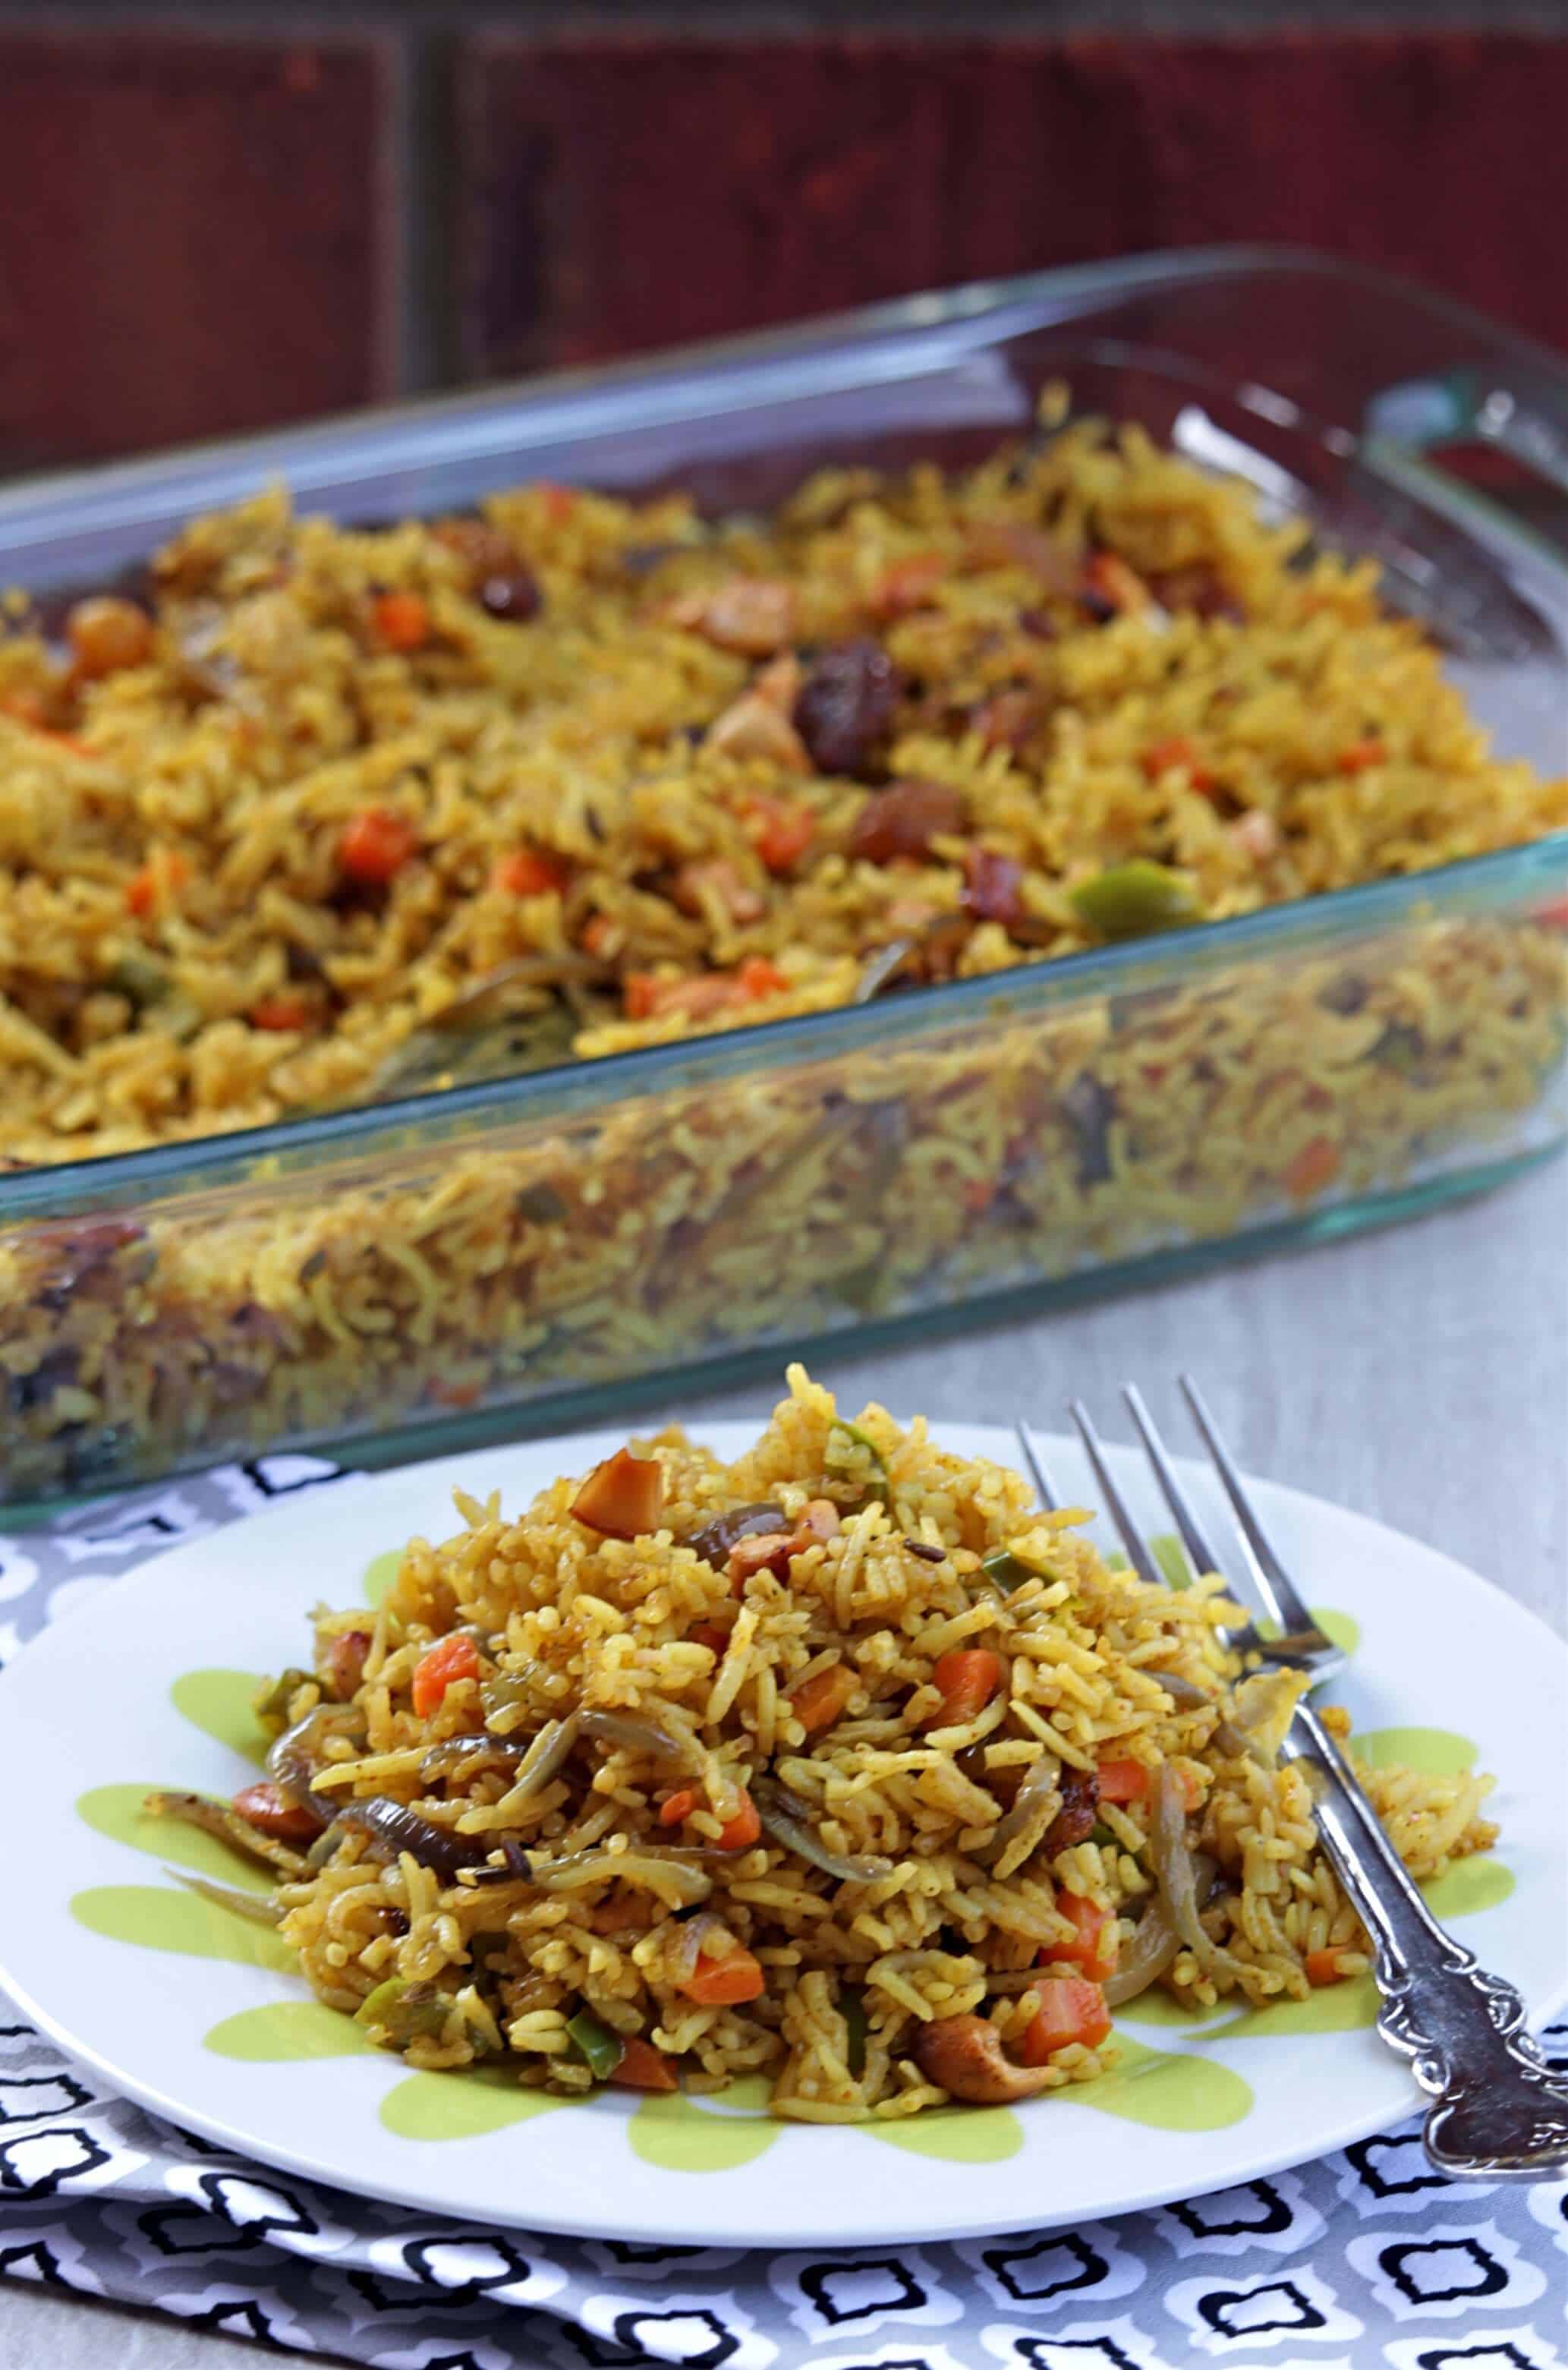 Vegetable Biriyani in a plate and a casserole